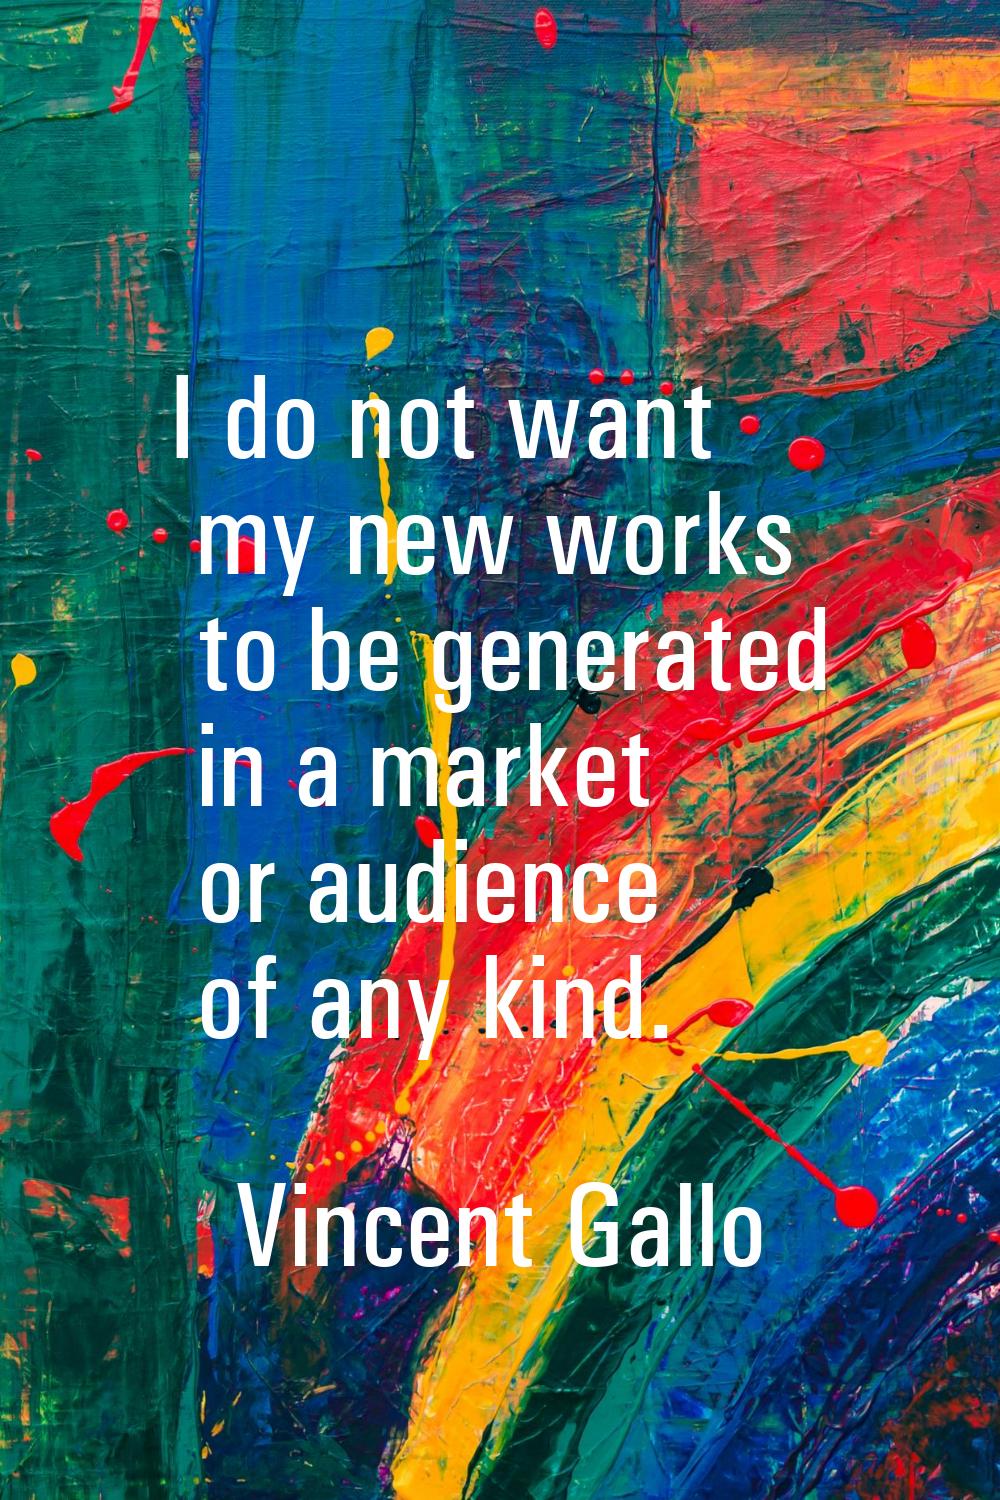 I do not want my new works to be generated in a market or audience of any kind.